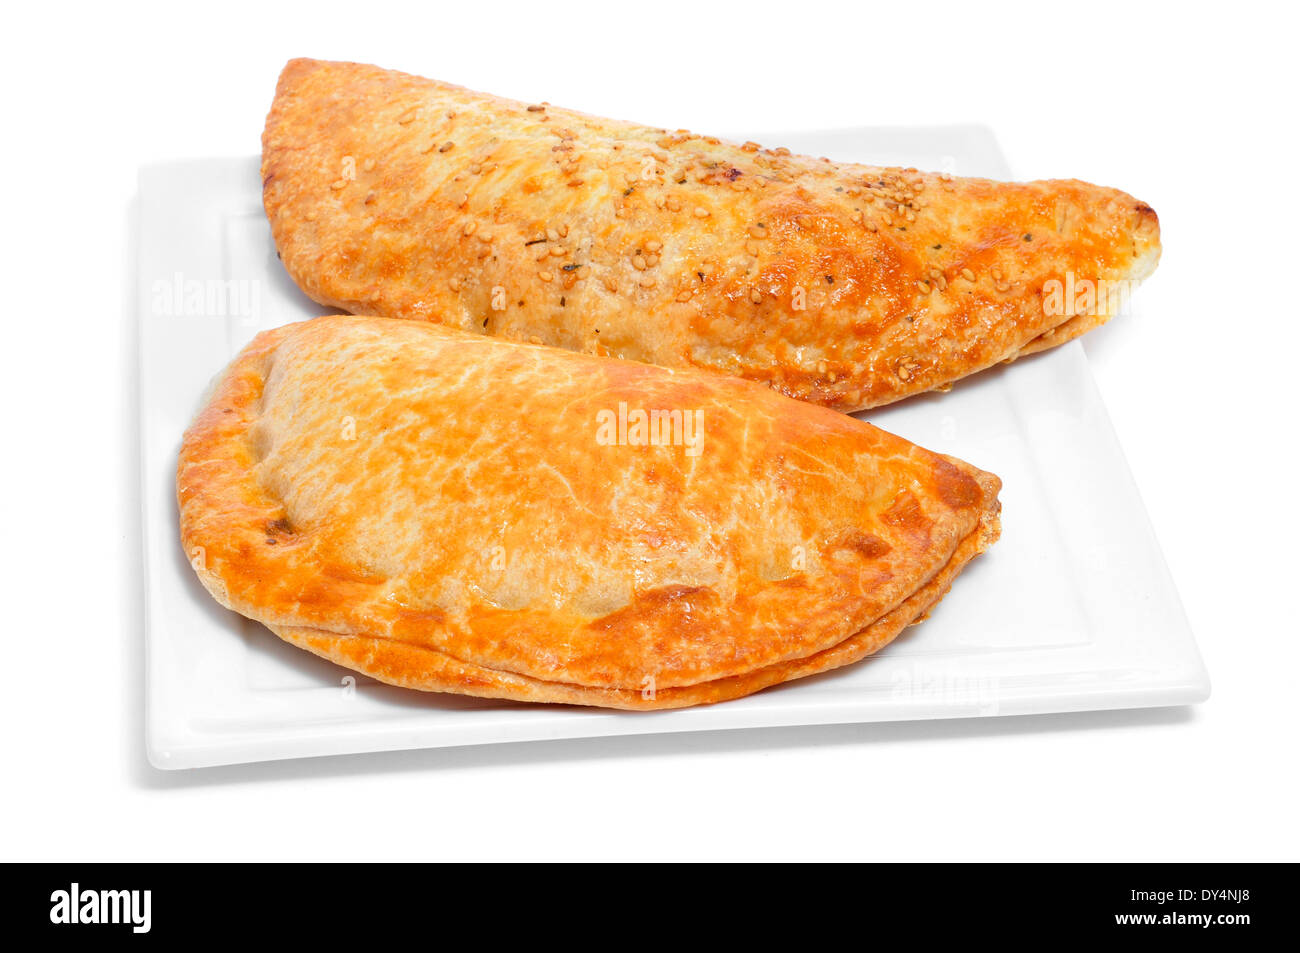 a plate with some different empanadas argentinas, typical argentine stuffed pastries, on a white background Stock Photo